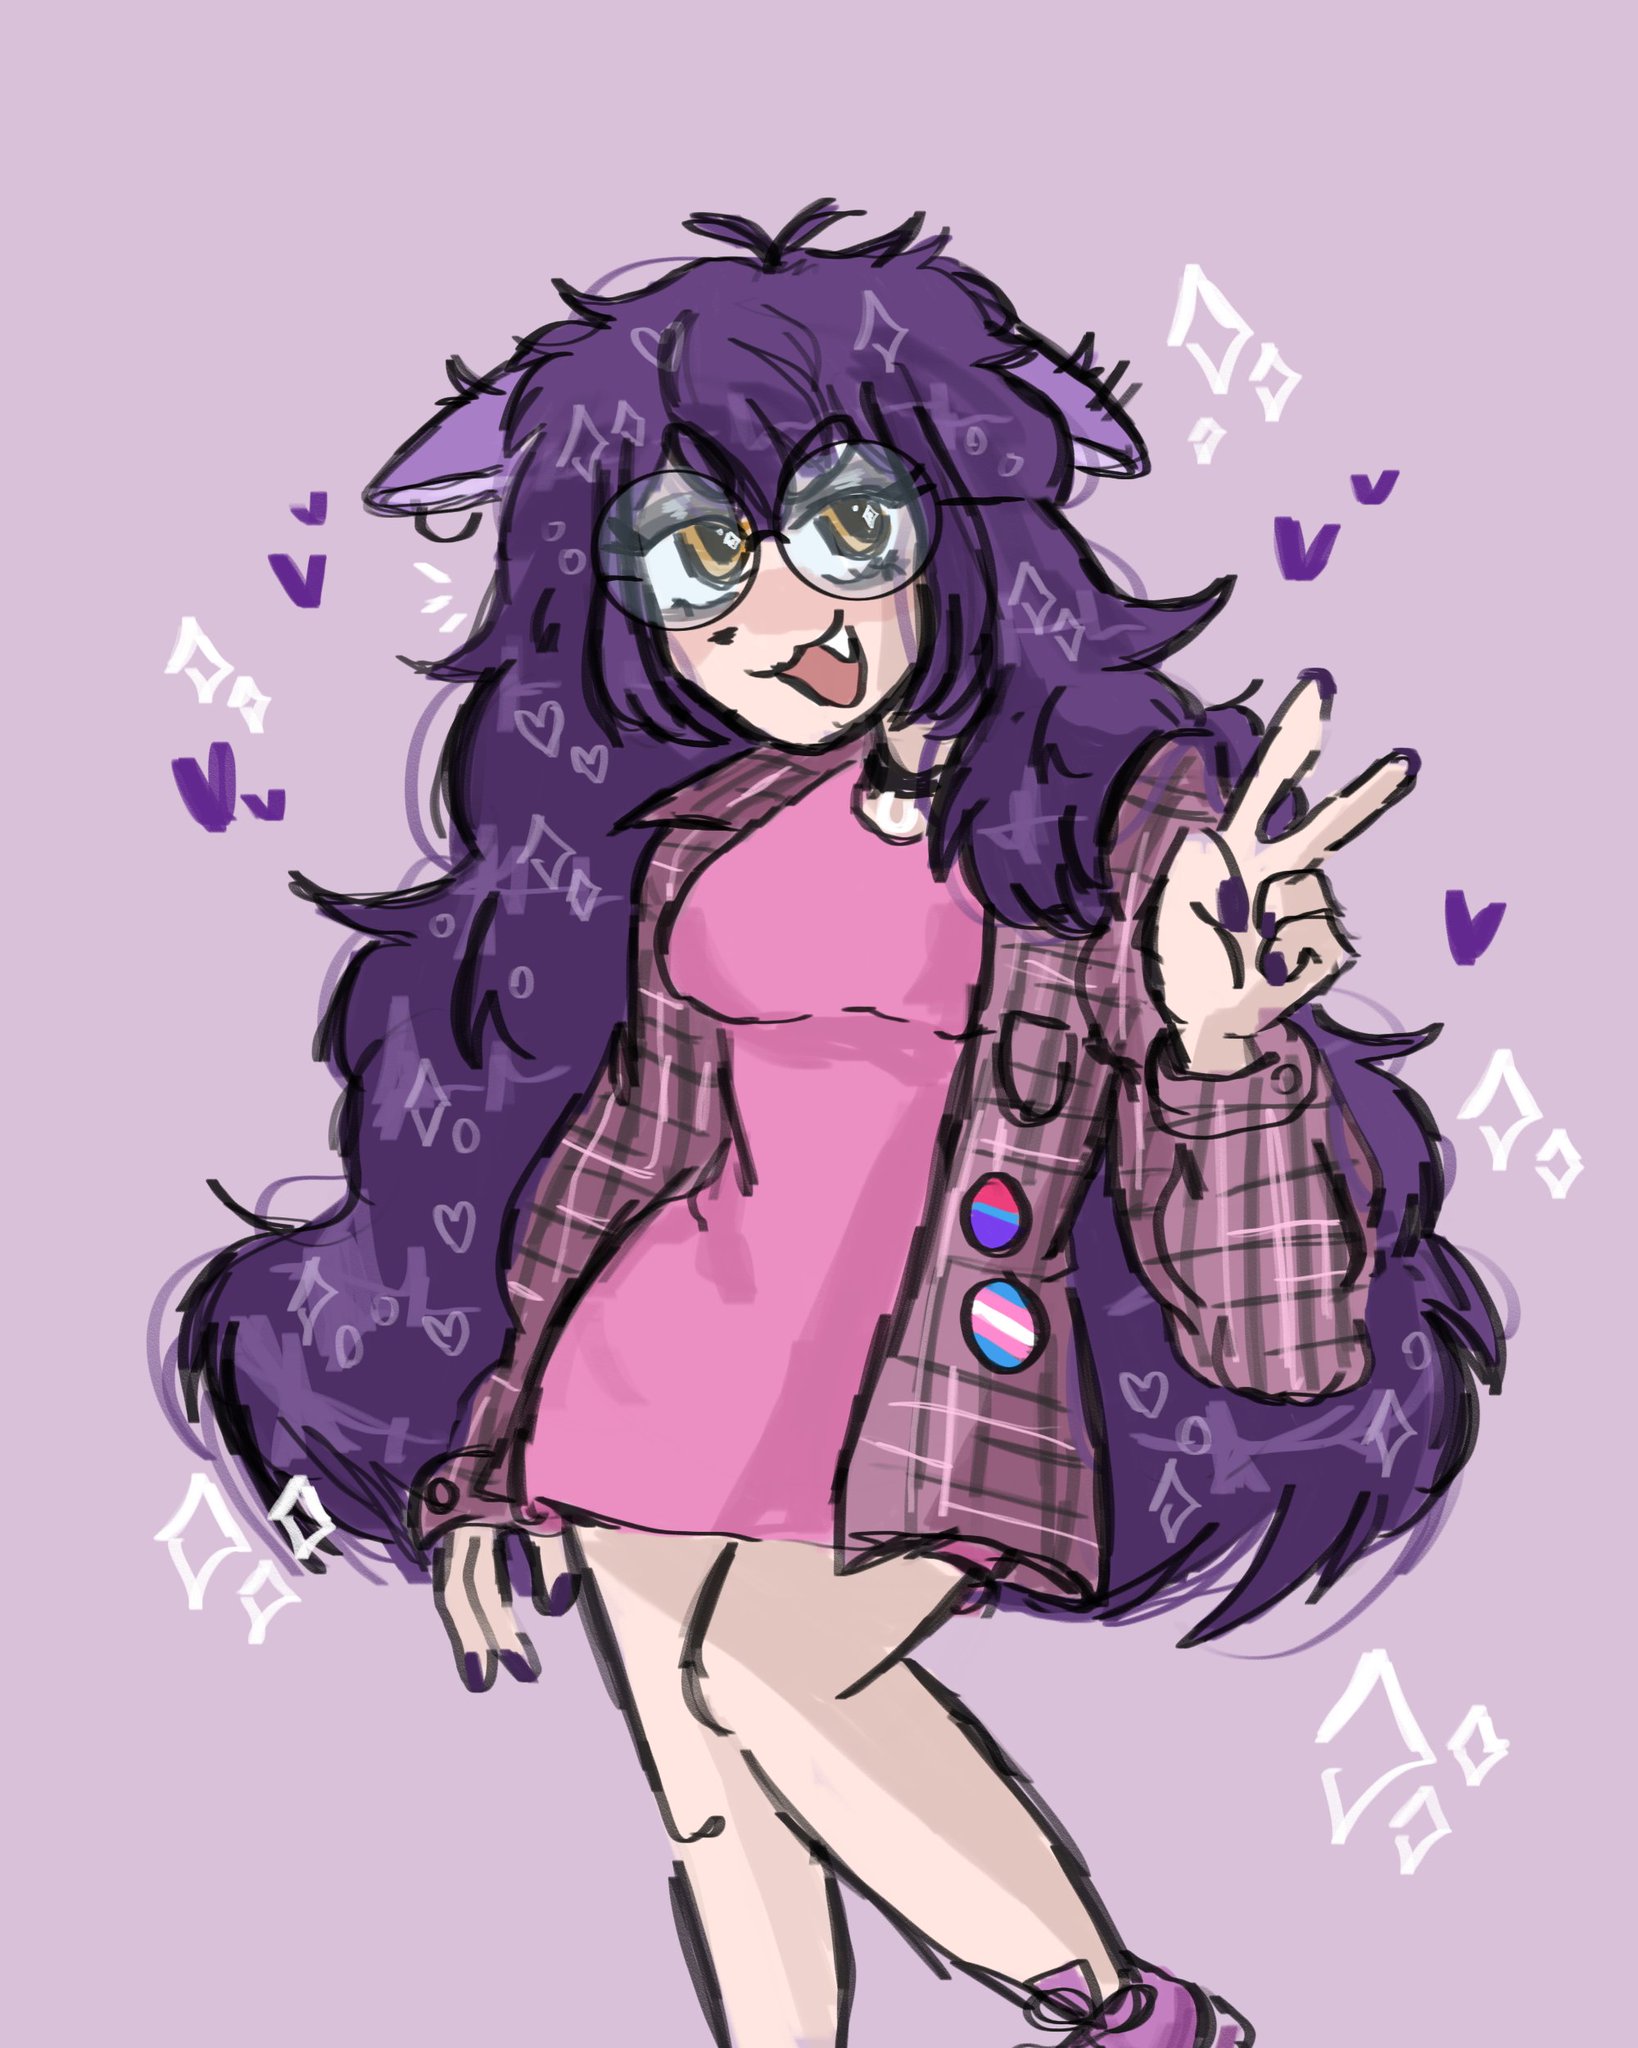 my OC as previously described, in yet another art style, doing a piece sign. she looks like she hasnt showered in a week and is overall a gremlin of a person